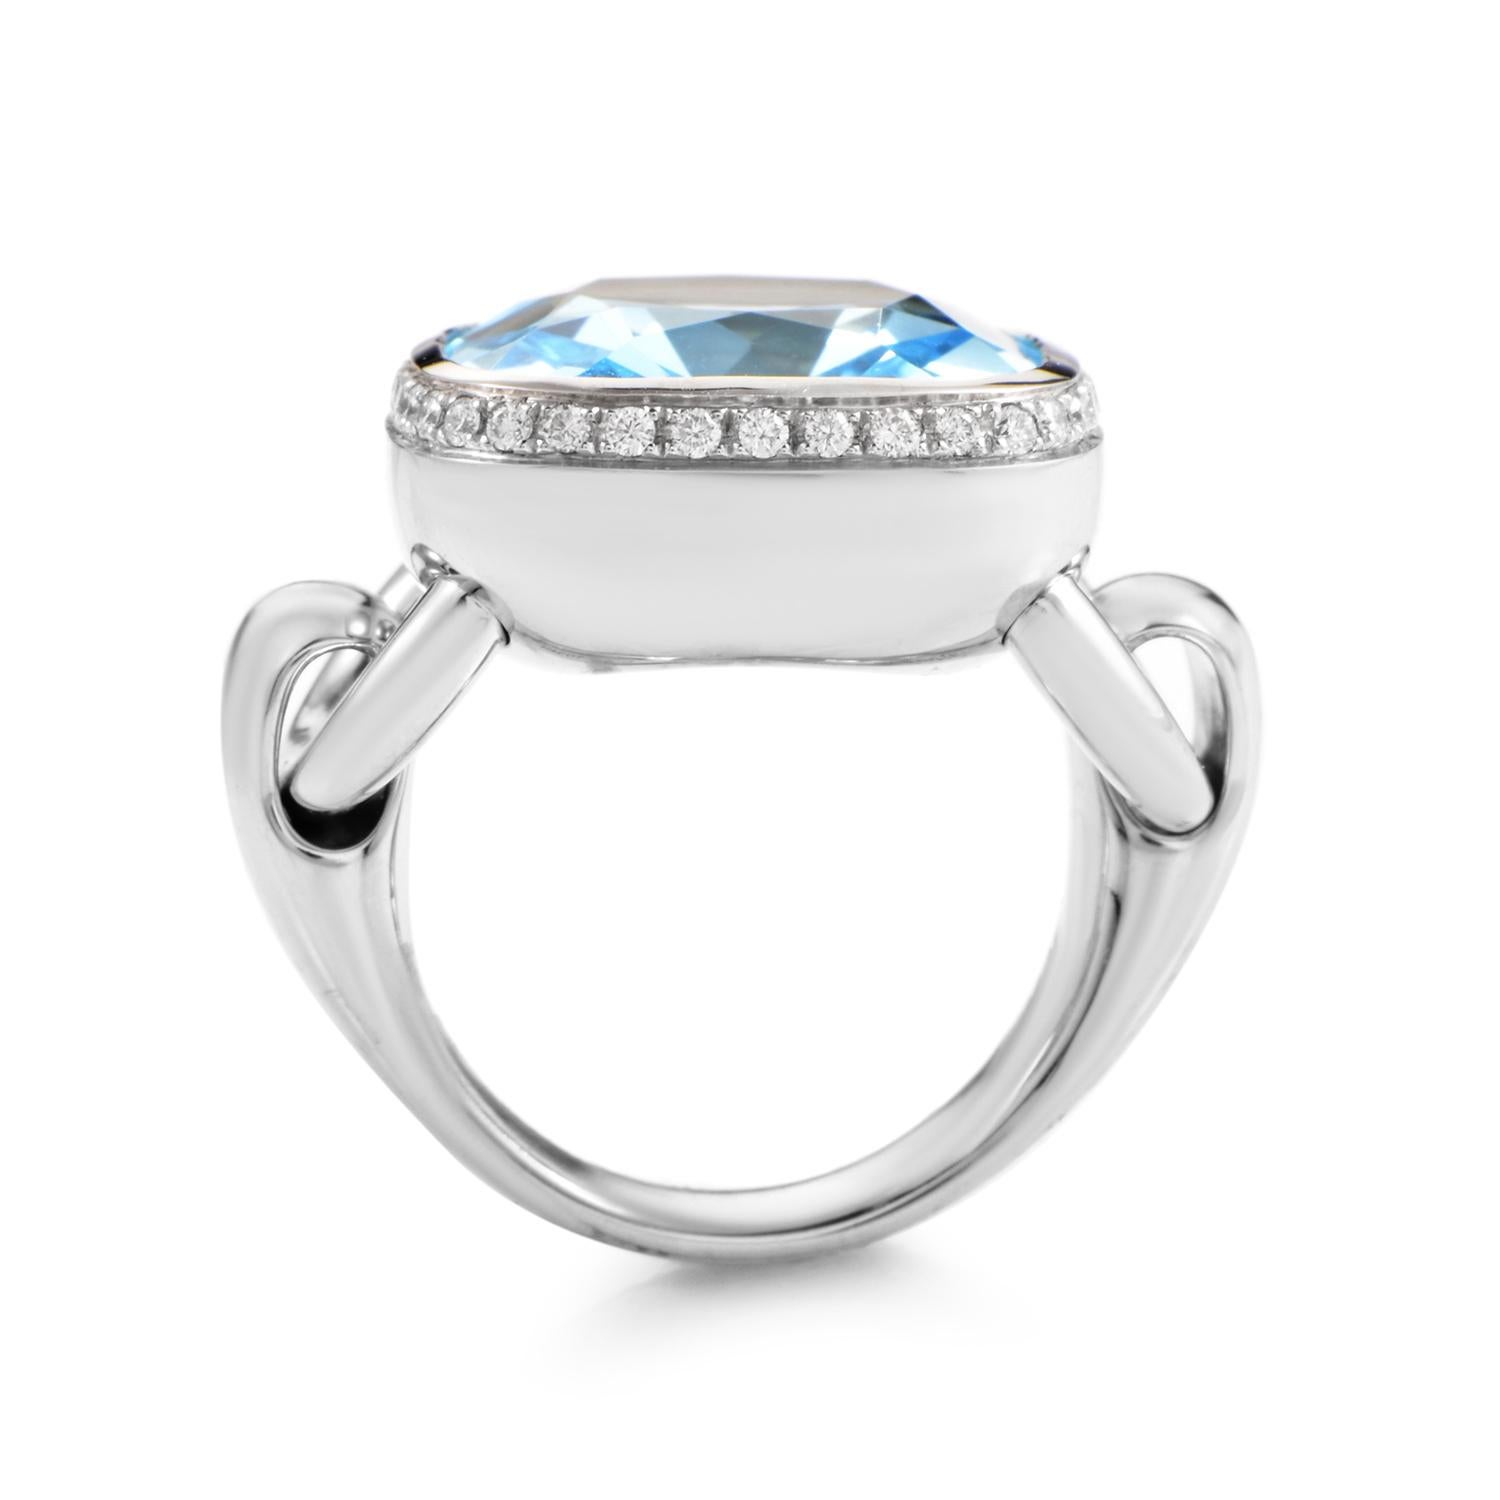 This extravagant Poiray ring is overwhelmingly glamorous. The ring is made of 18K white gold that is specially designed with hinges for a smooth, movable, cushion shaped bezel setting. A faceted ice blue topaz totaling a generous ~12.45ct is